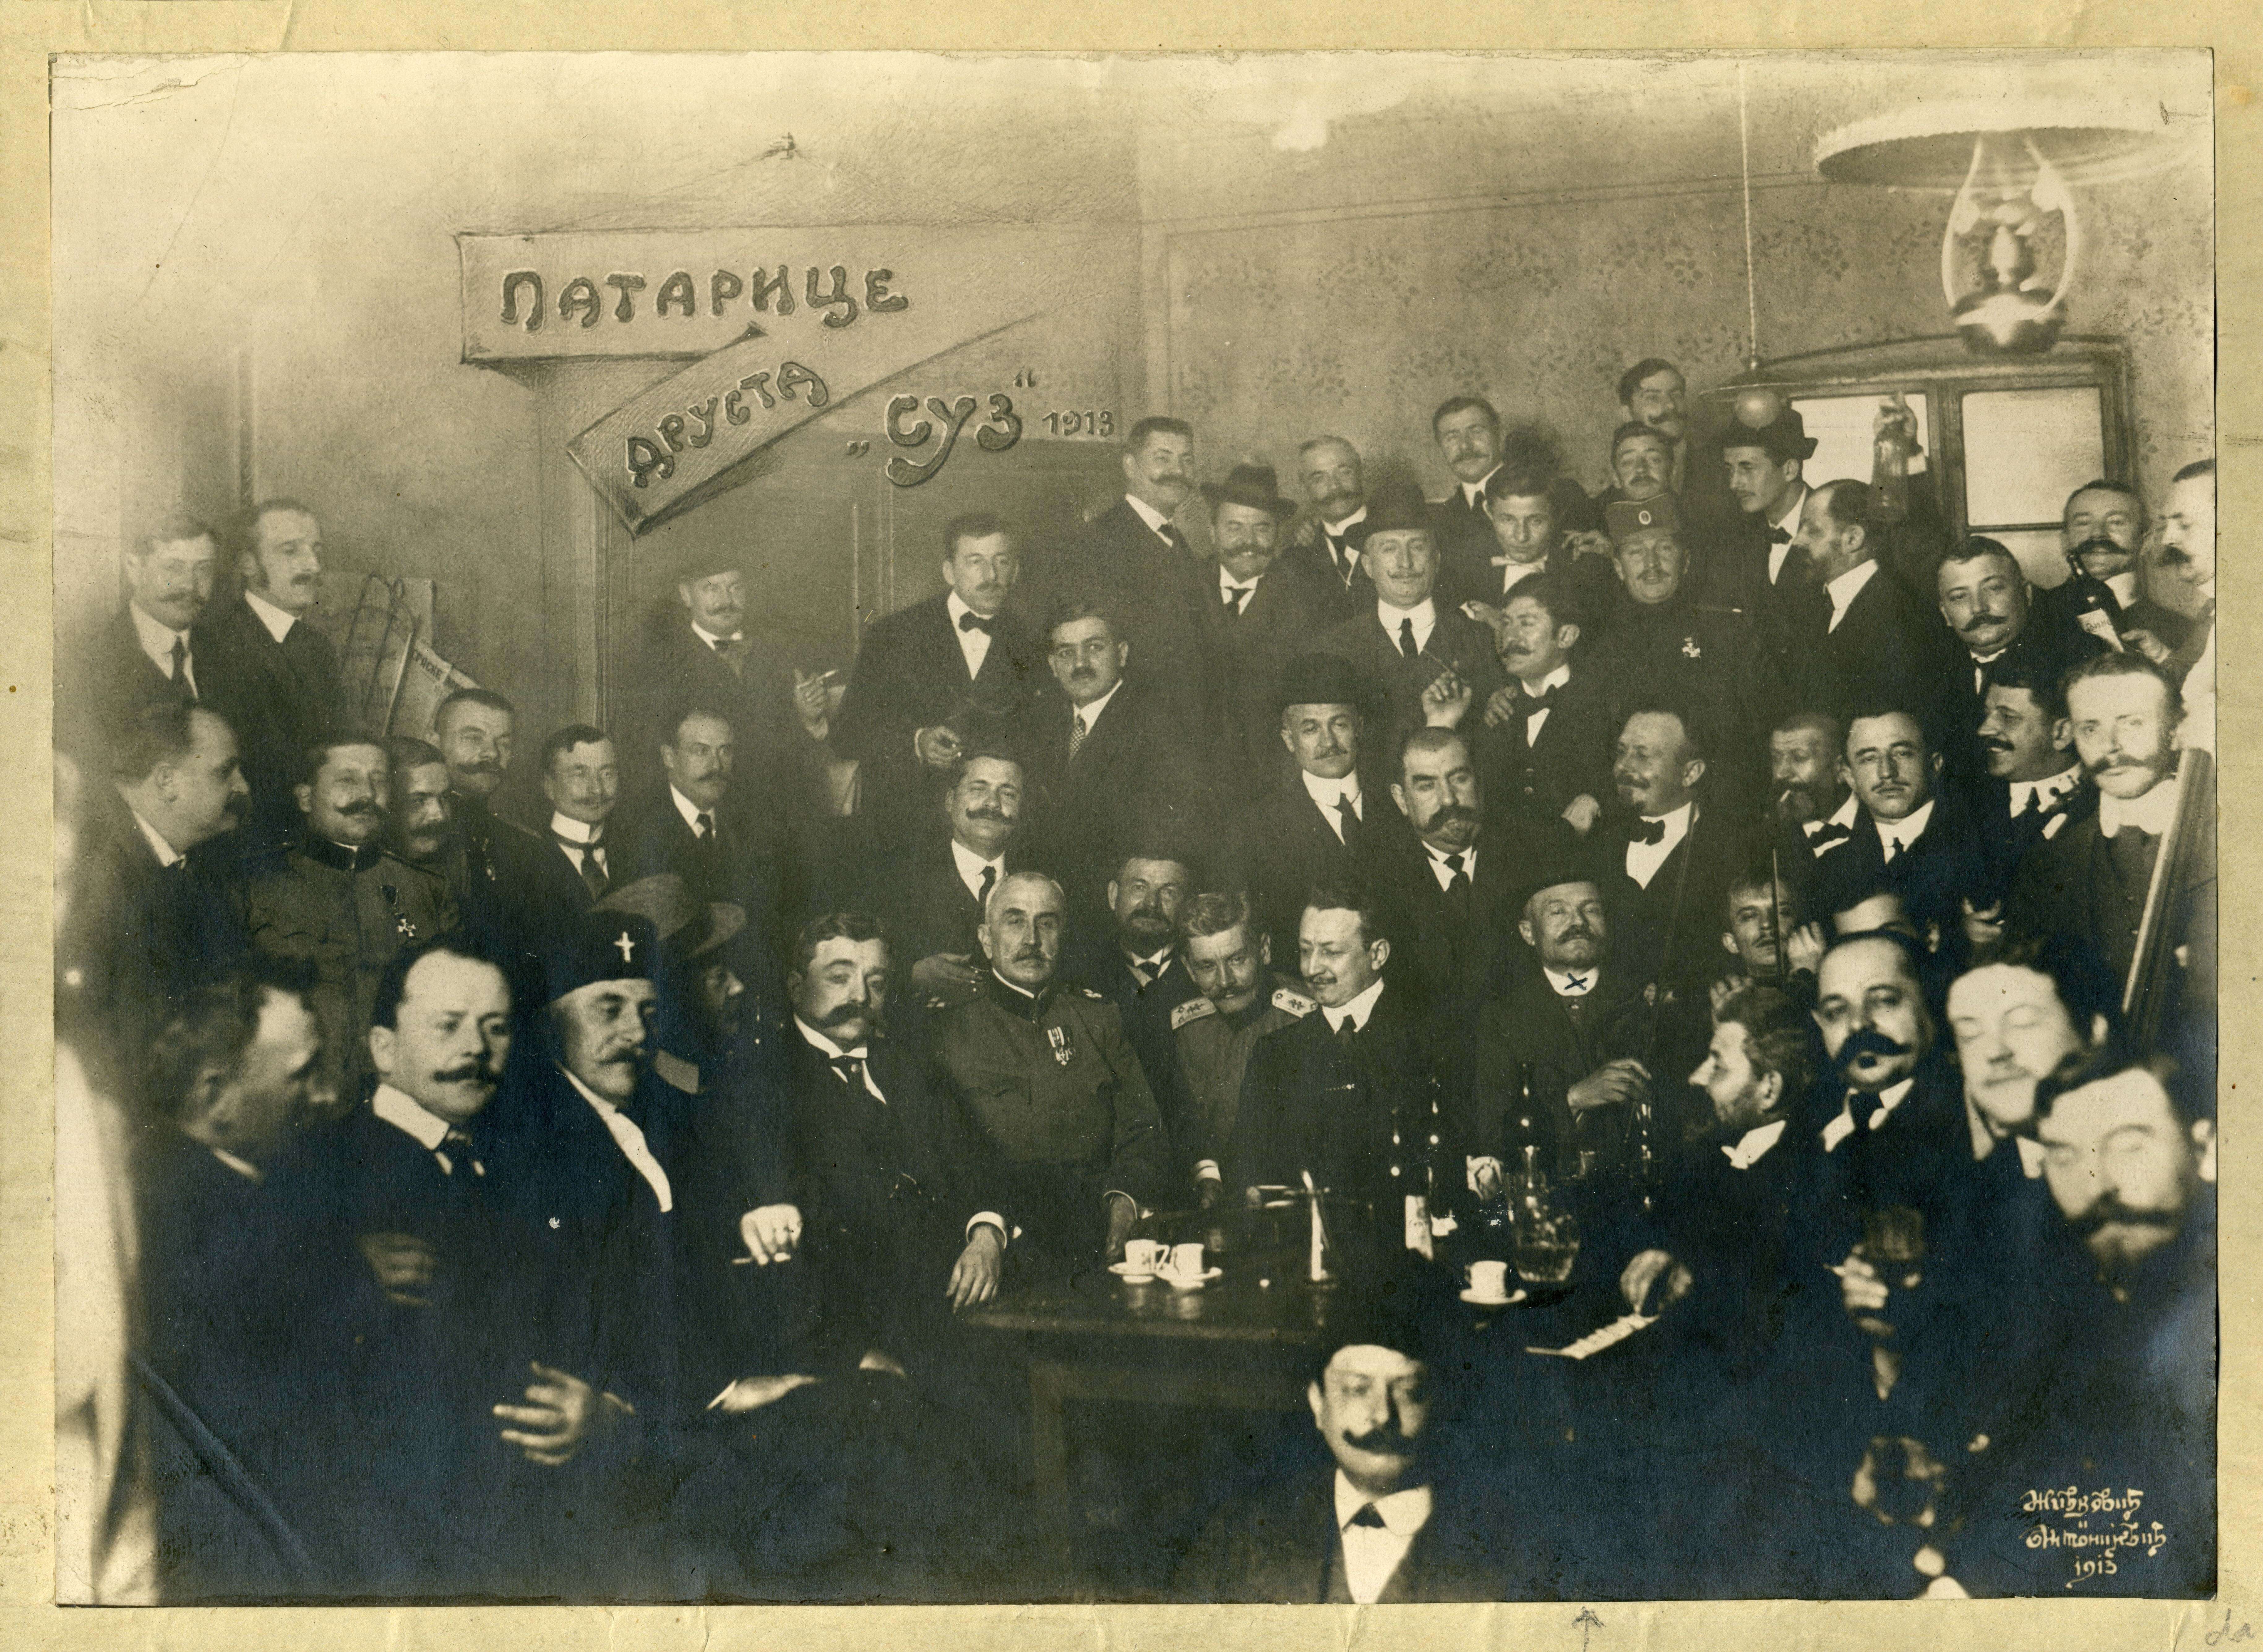 The second day of the patron saint celebration, the patarice, of the music society “Suz”, 1913. (SASA Archive, 14197/9)